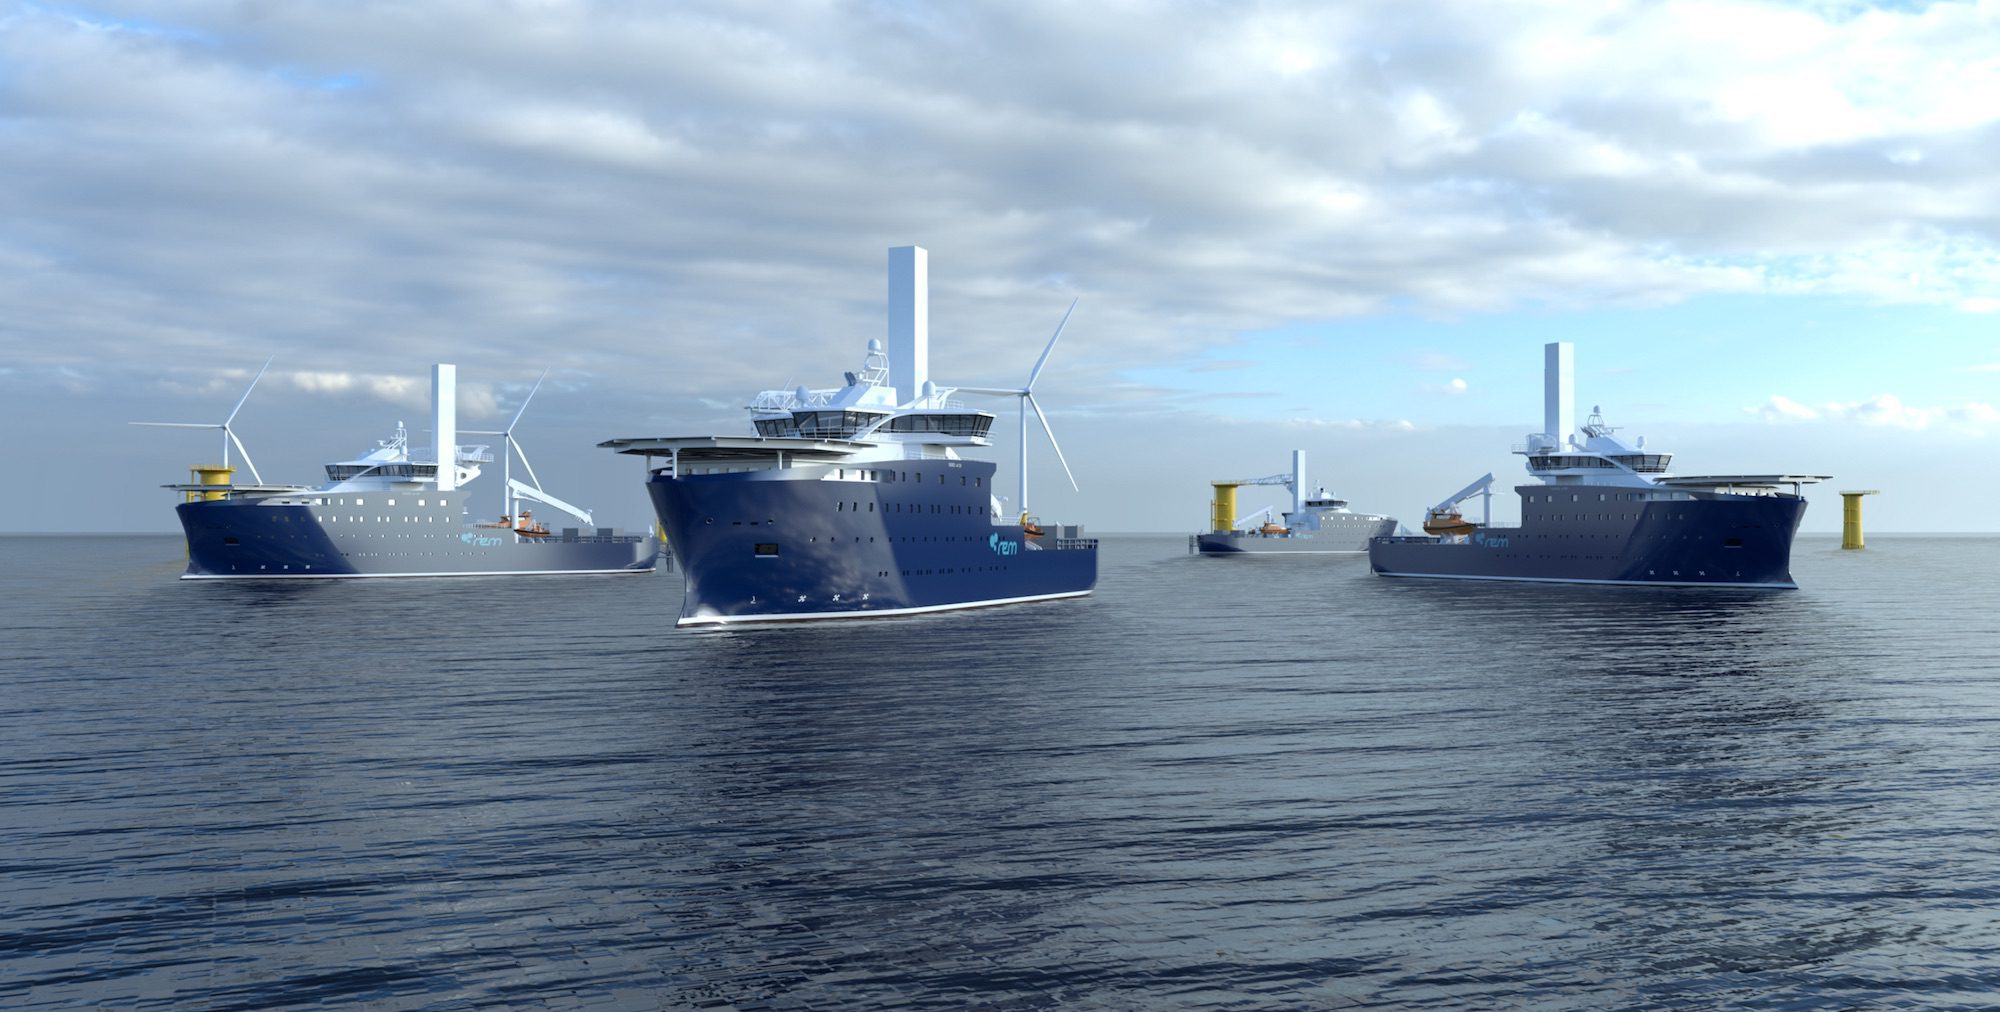 Vard to Construct Two Offshore Wind Operations Vessels for Rem Offshore